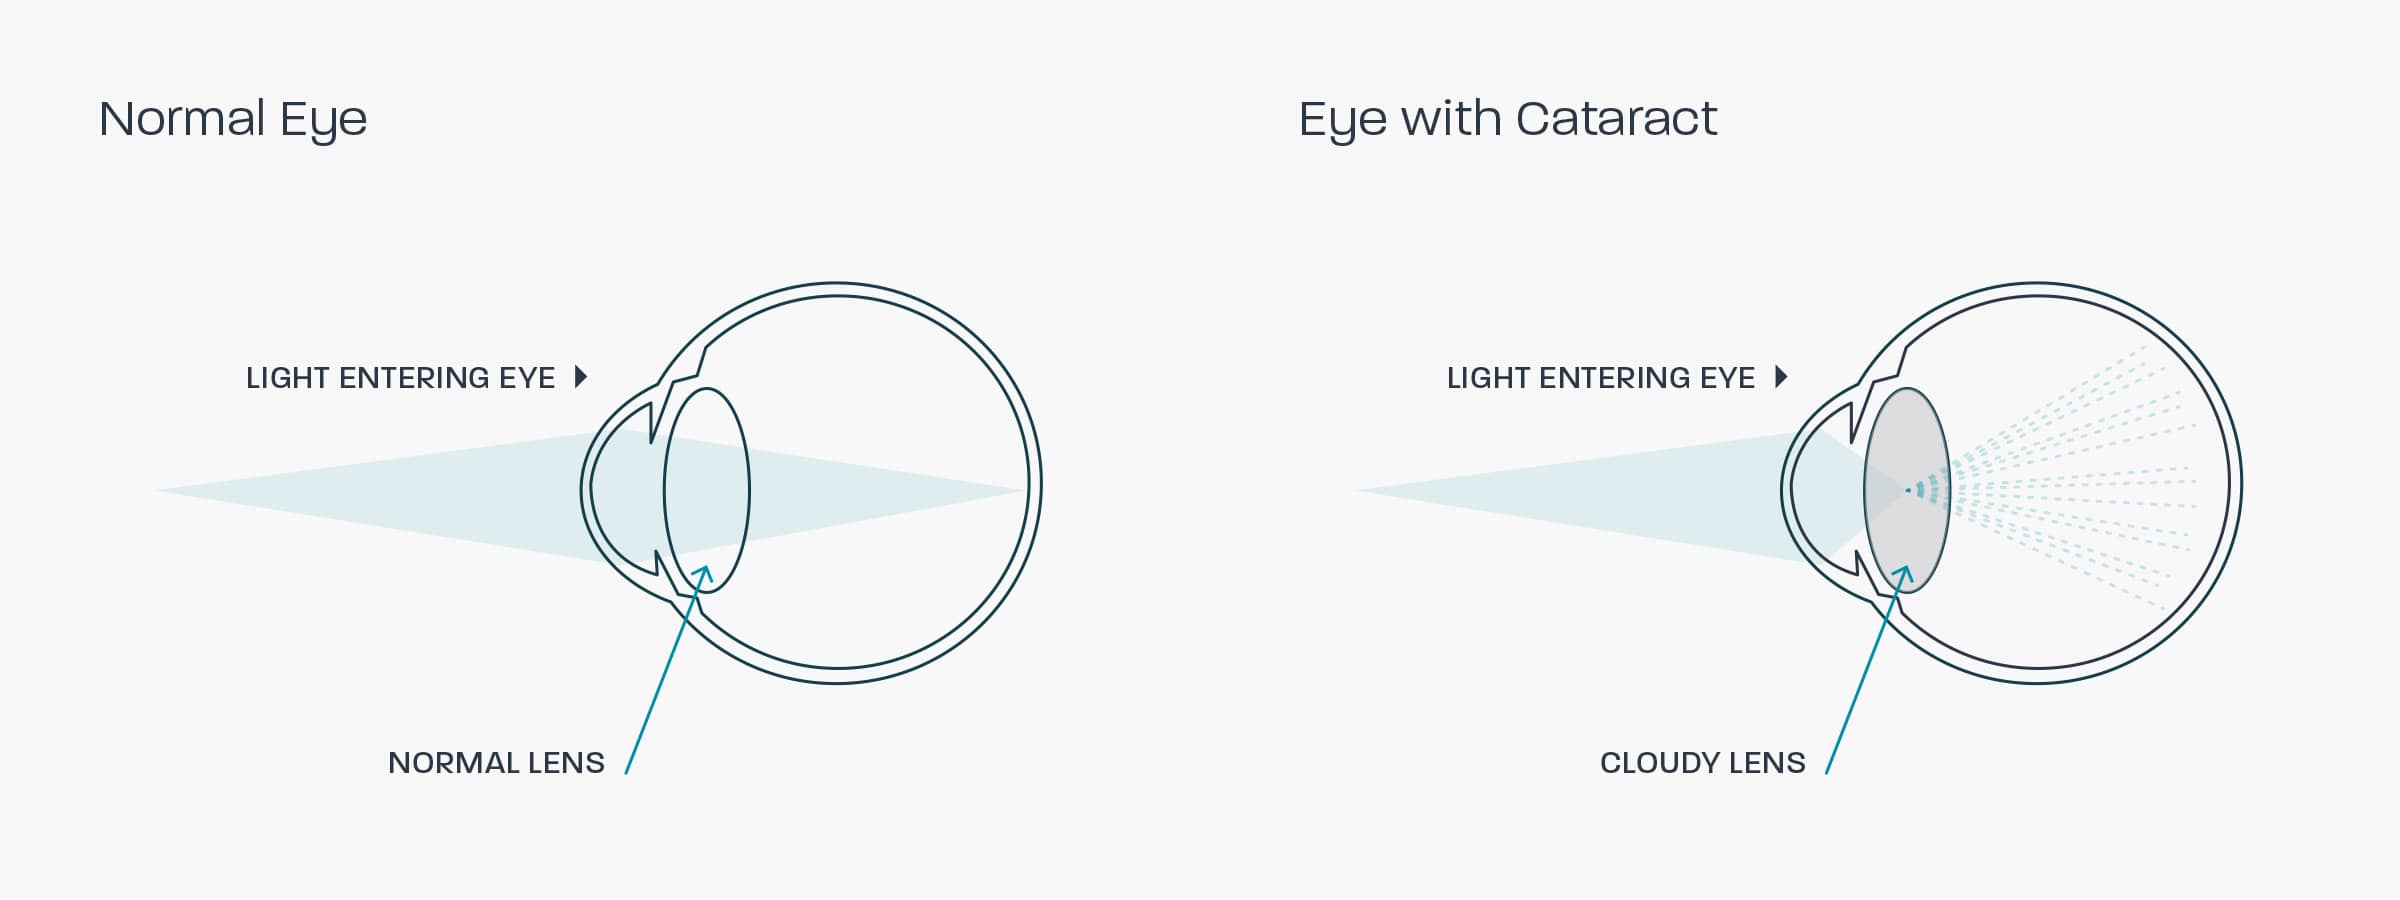 A graphic showing how cataracts affects the eye